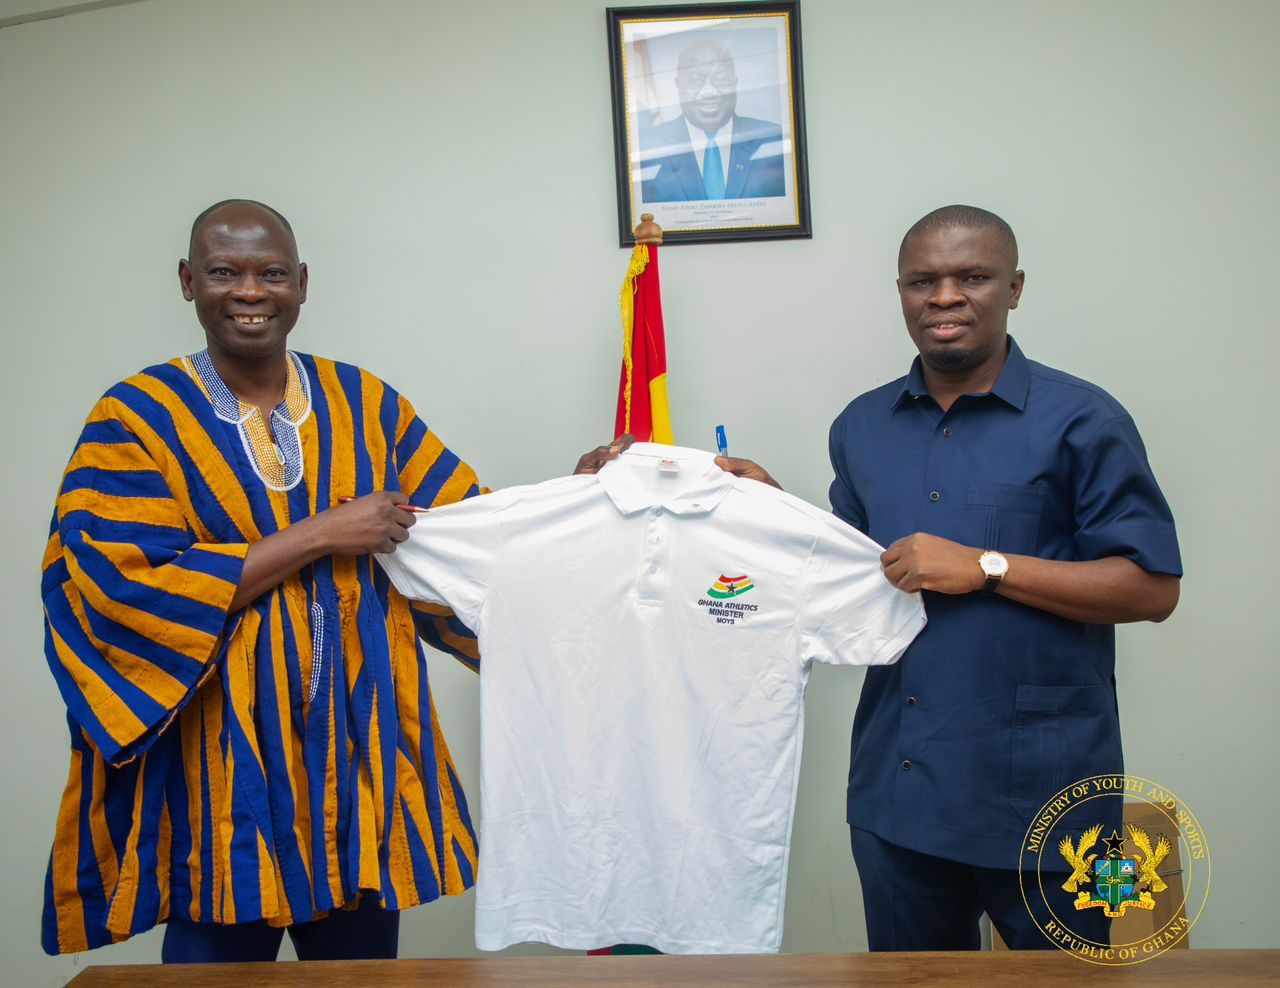  Athletics must win more medals for Ghana during 13th African Games – Hon. Mustapha Ussif